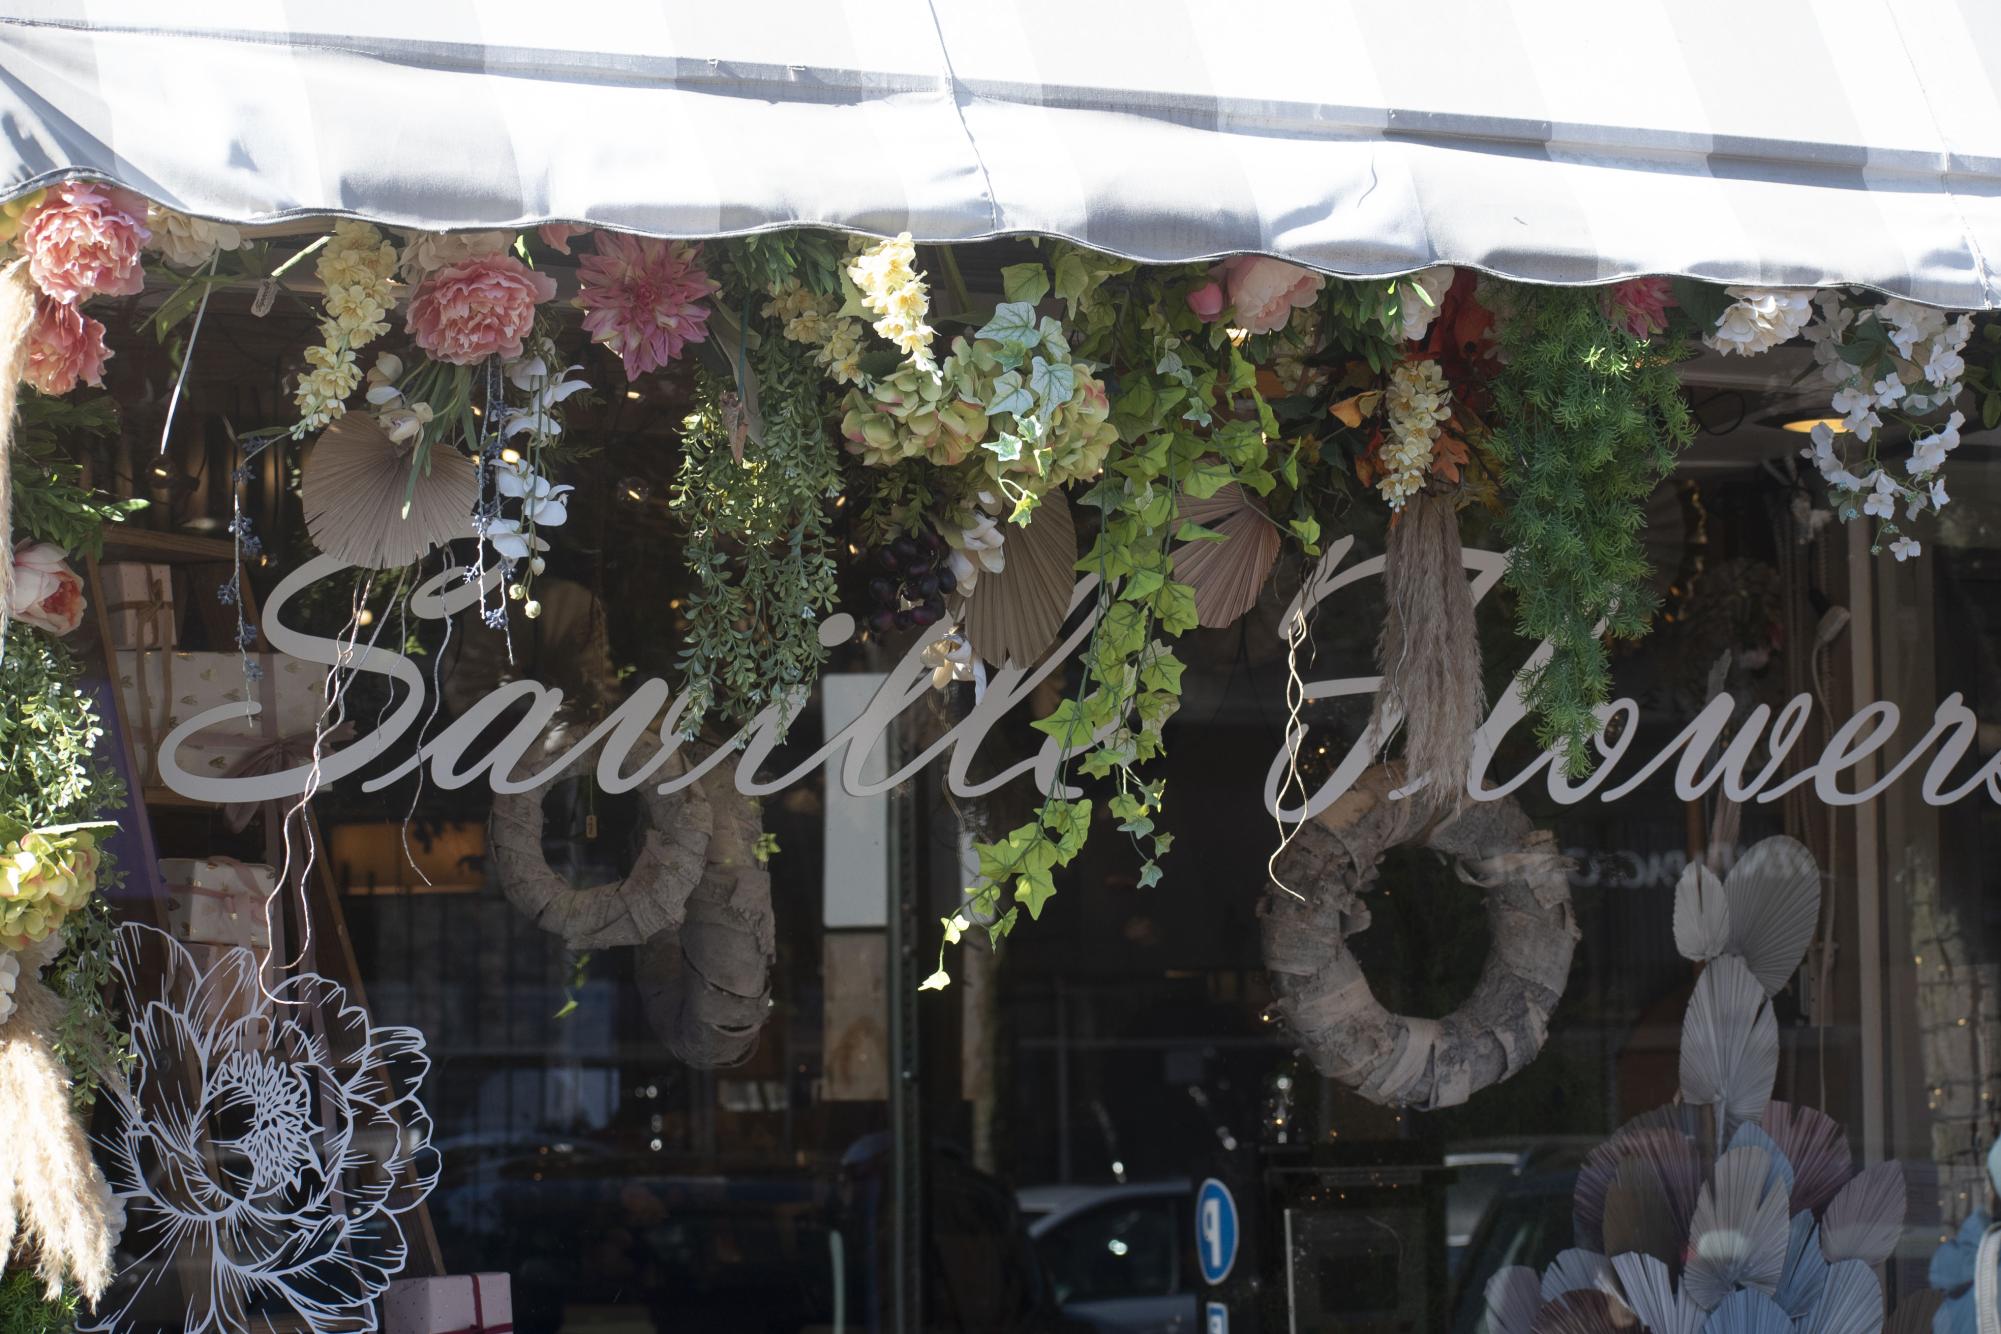 A storefront window covered in flowers with “Saville Flowers” written on it.